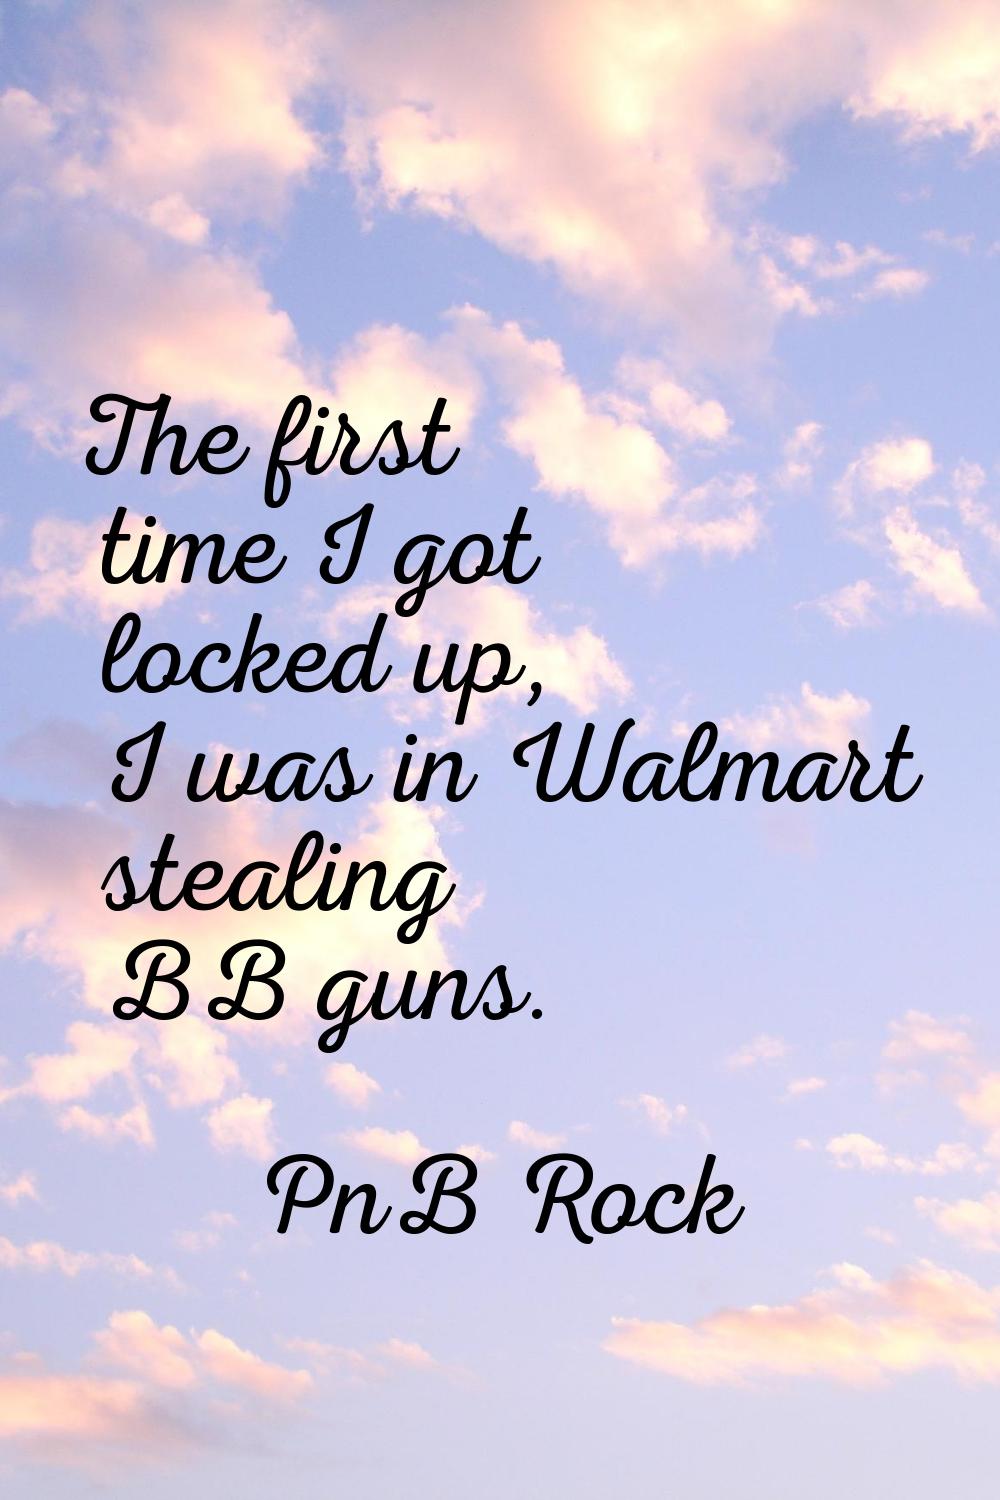 The first time I got locked up, I was in Walmart stealing BB guns.